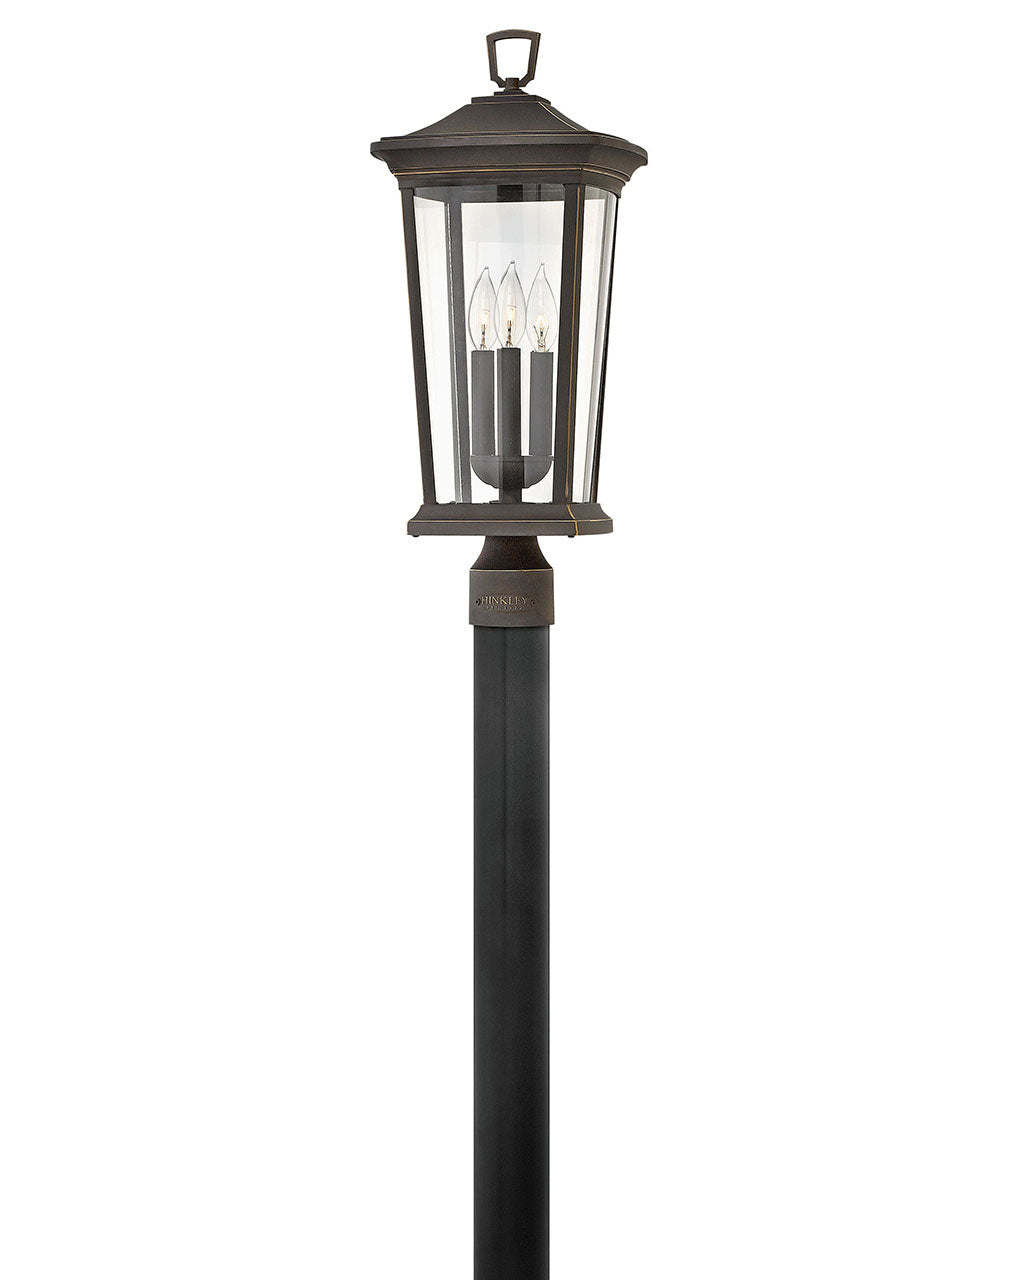 Hinkley - 2361OZ-LV - LED Post Top or Pier Mount Lantern - Bromley - Oil Rubbed Bronze